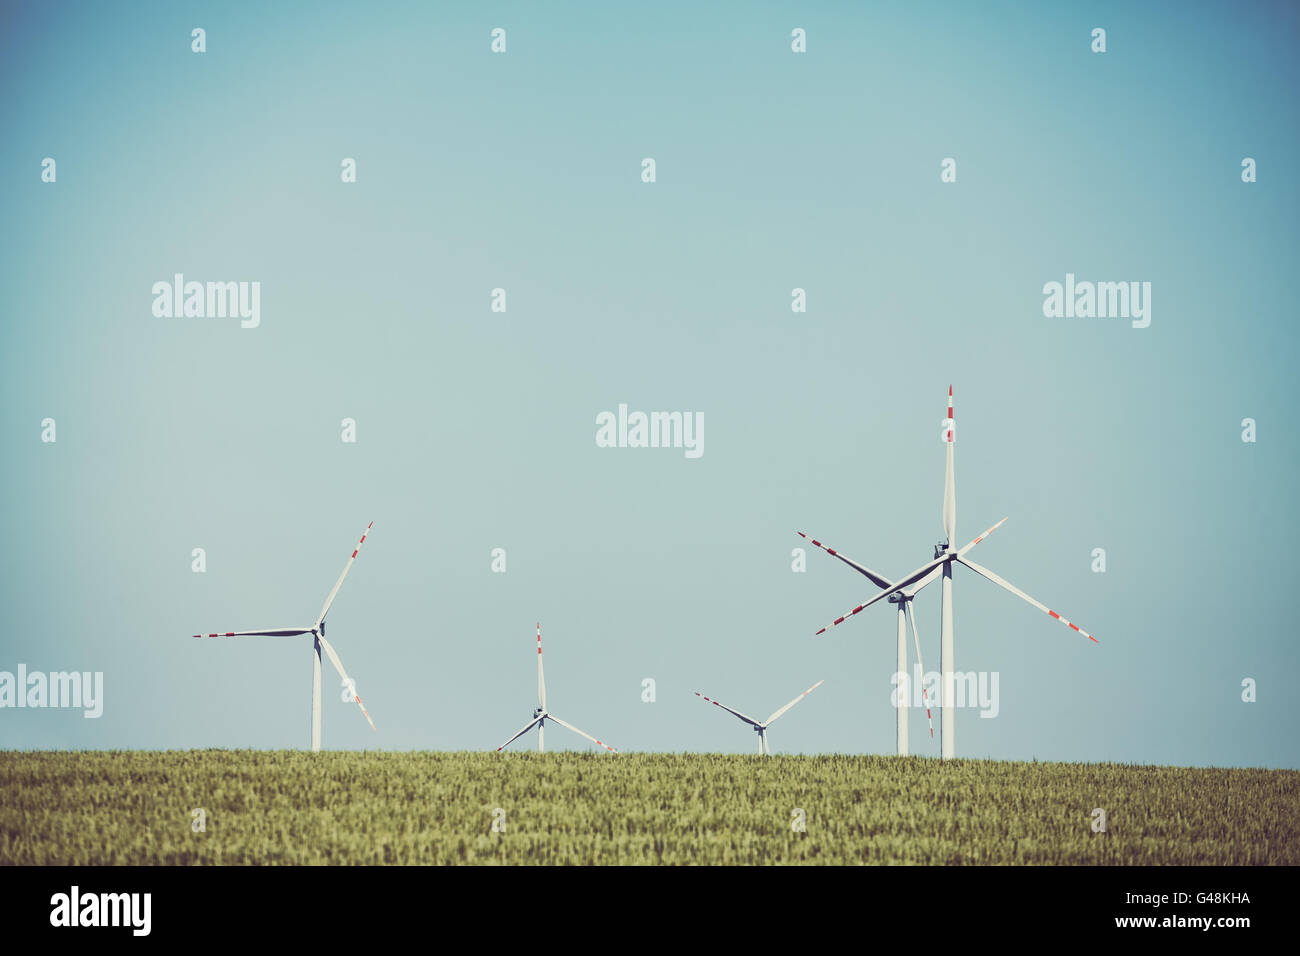 Old film retro toned windmills on a cereal field, alternative energy concept. Stock Photo